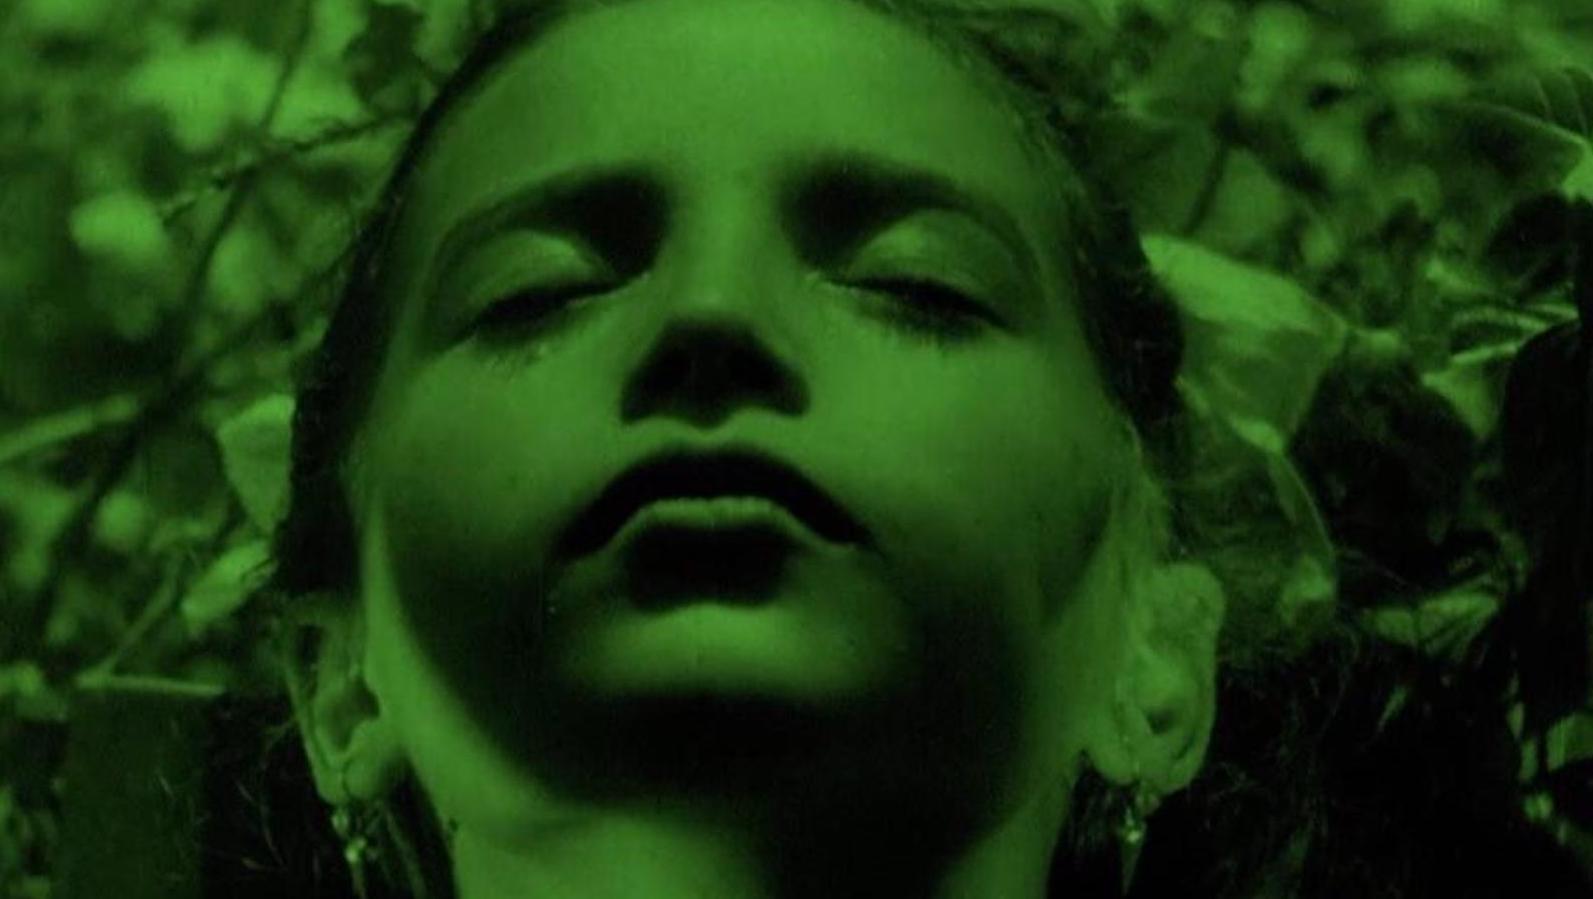 An image with a green filter of a young girl's face in extreme closeup, eyes closed,.